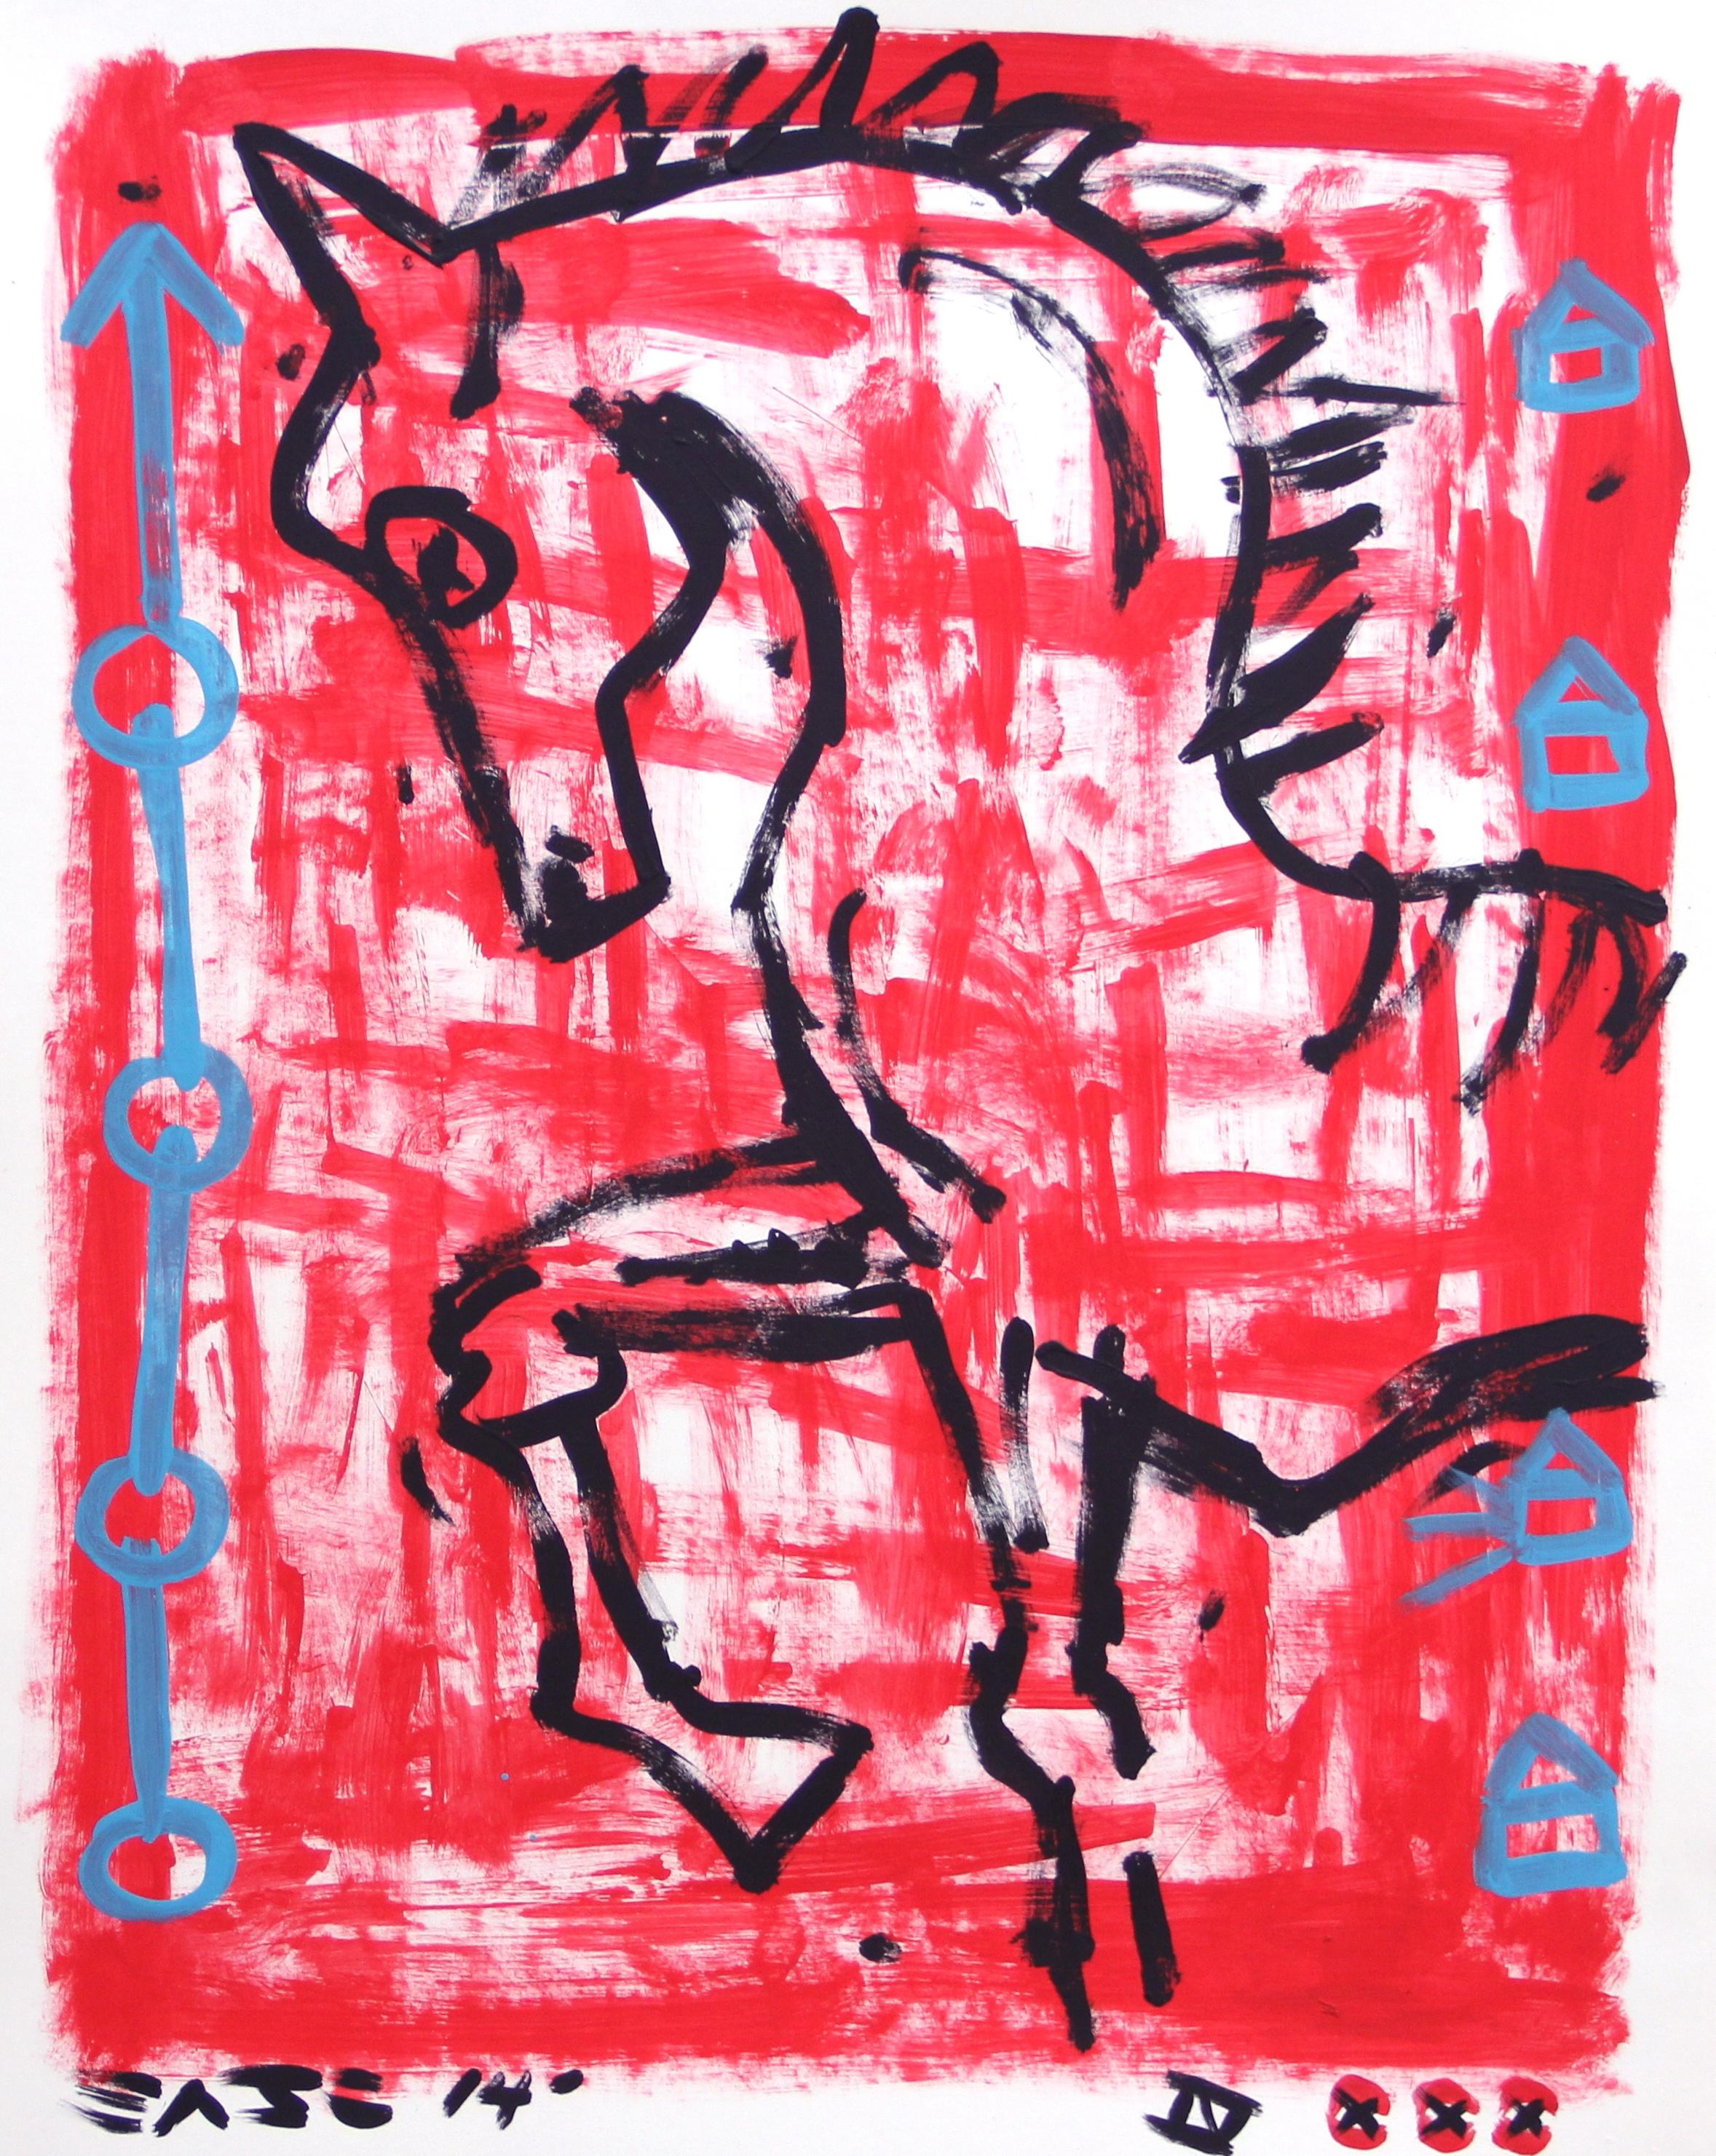 Gary John Abstract Painting - Red Horse